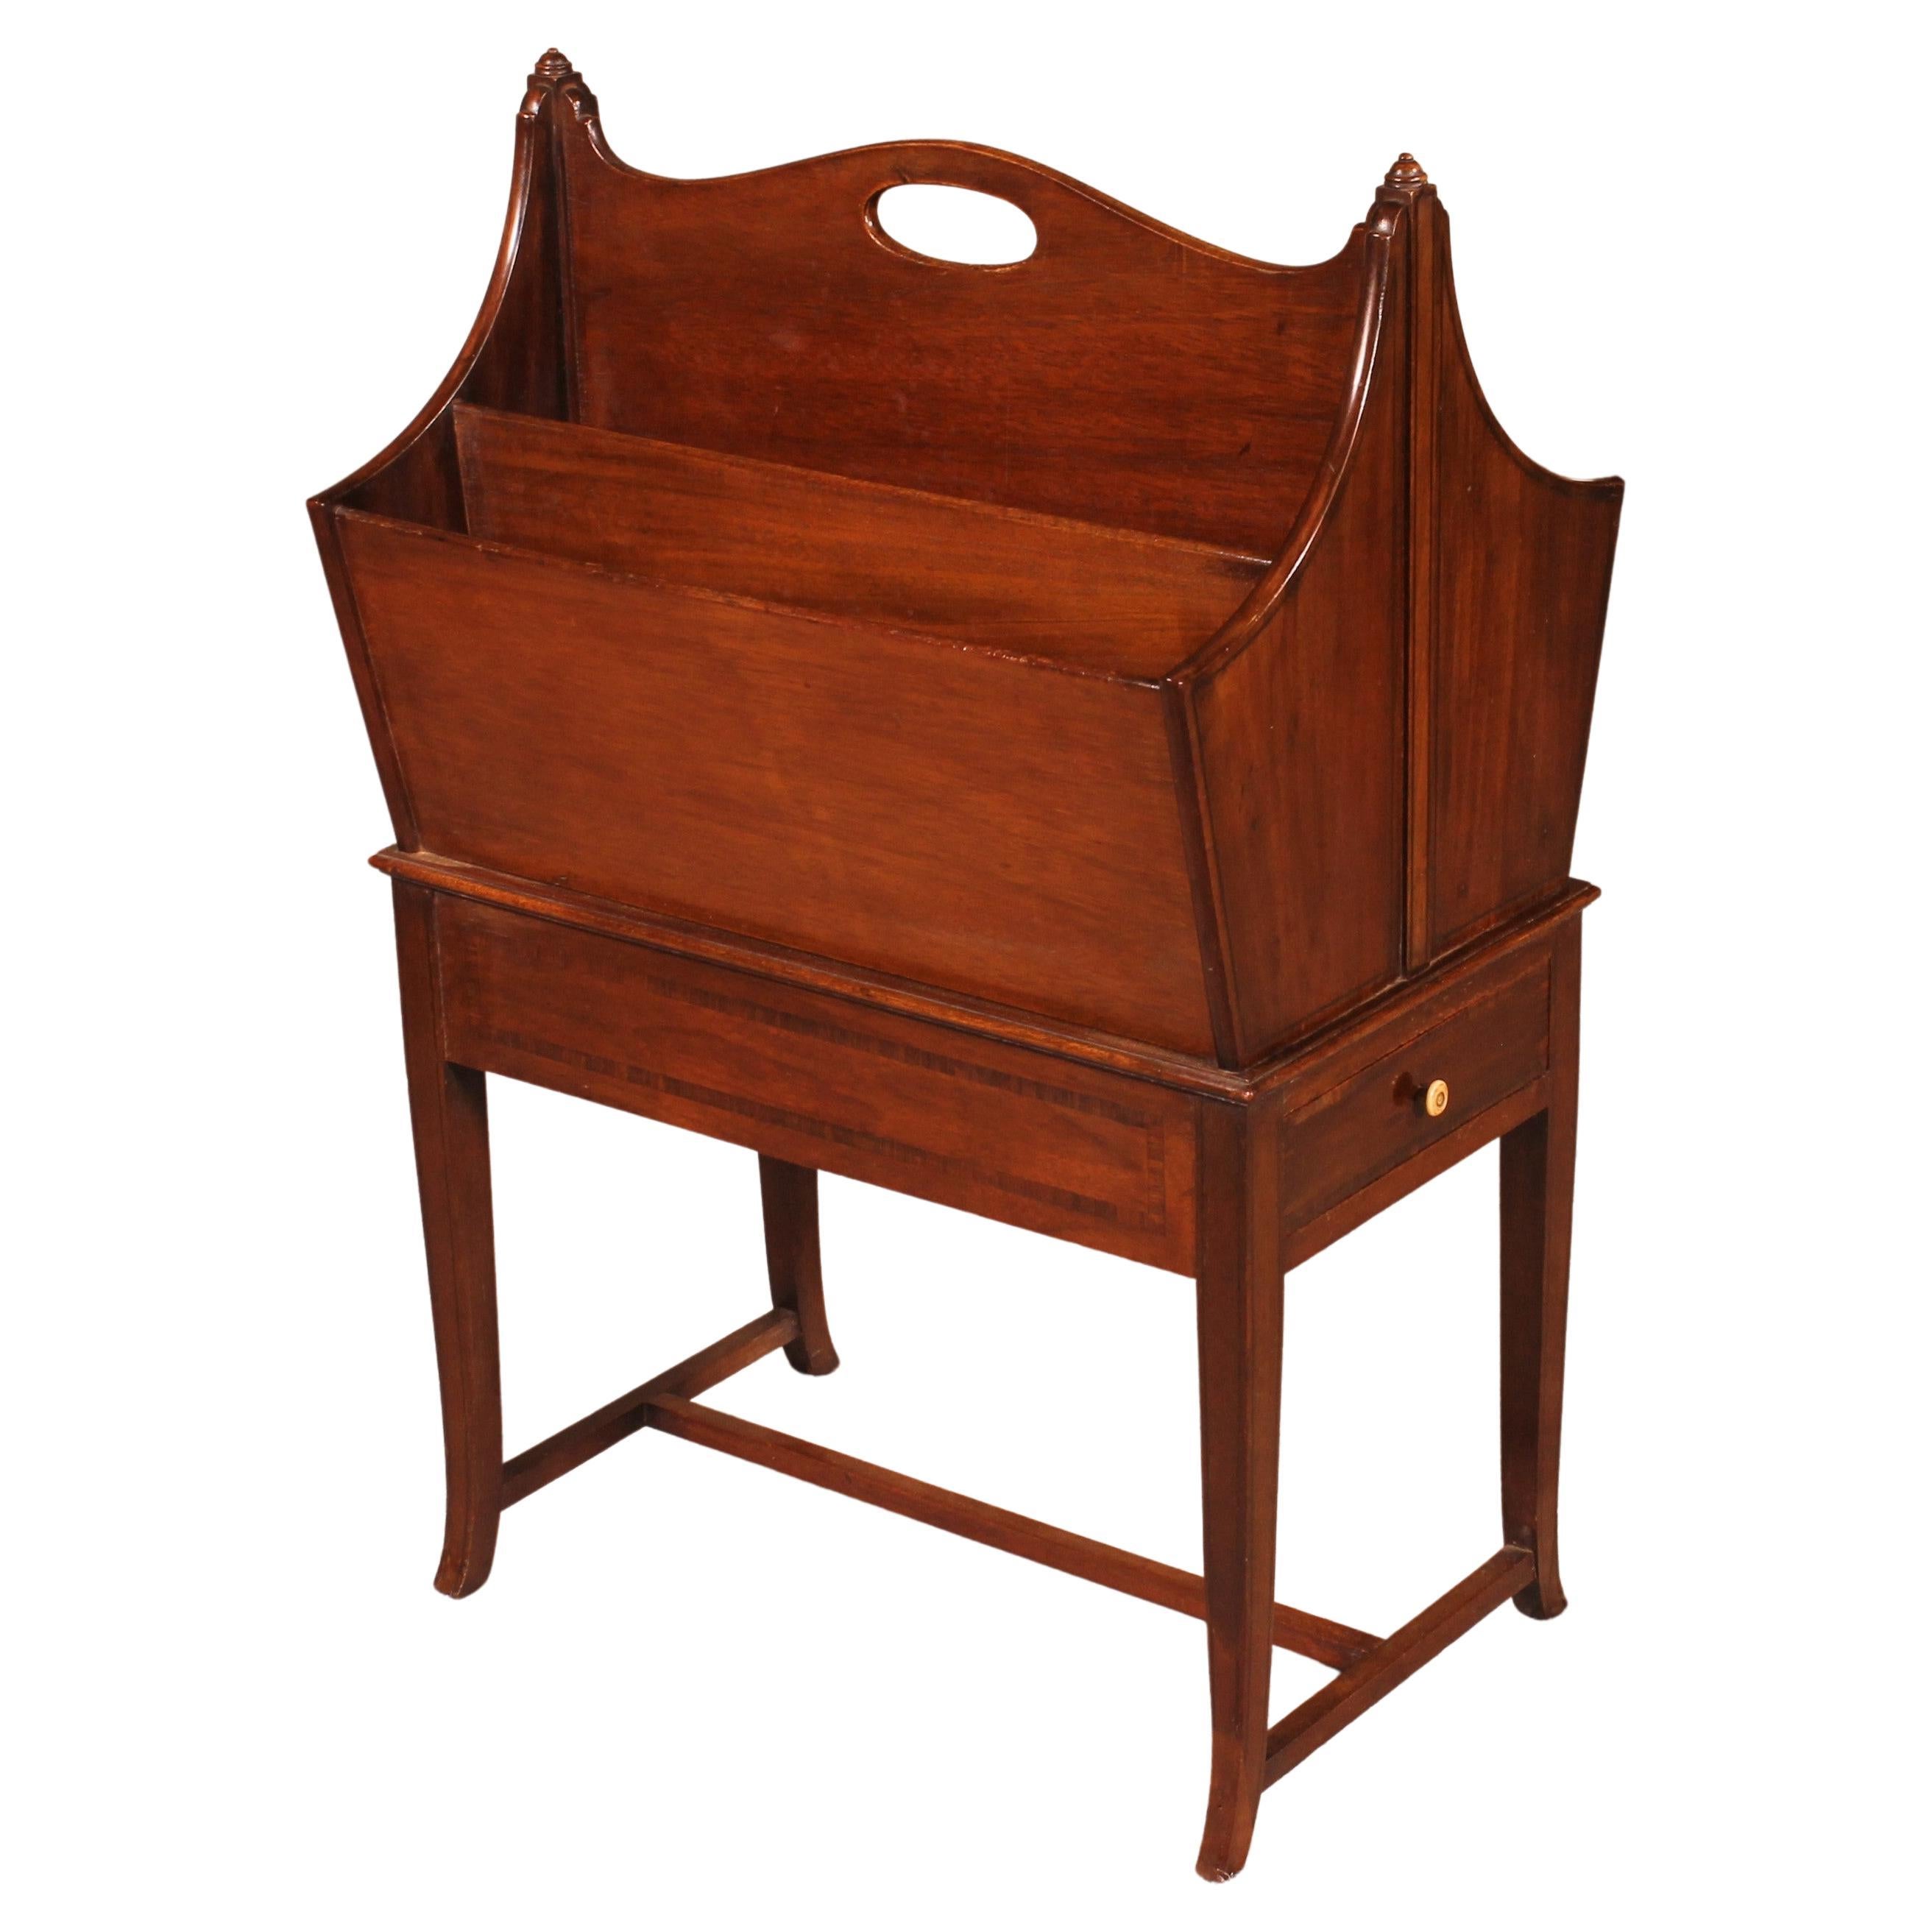 Canterbury or Newspaper Rack in Mahogany from the Edwardian Period